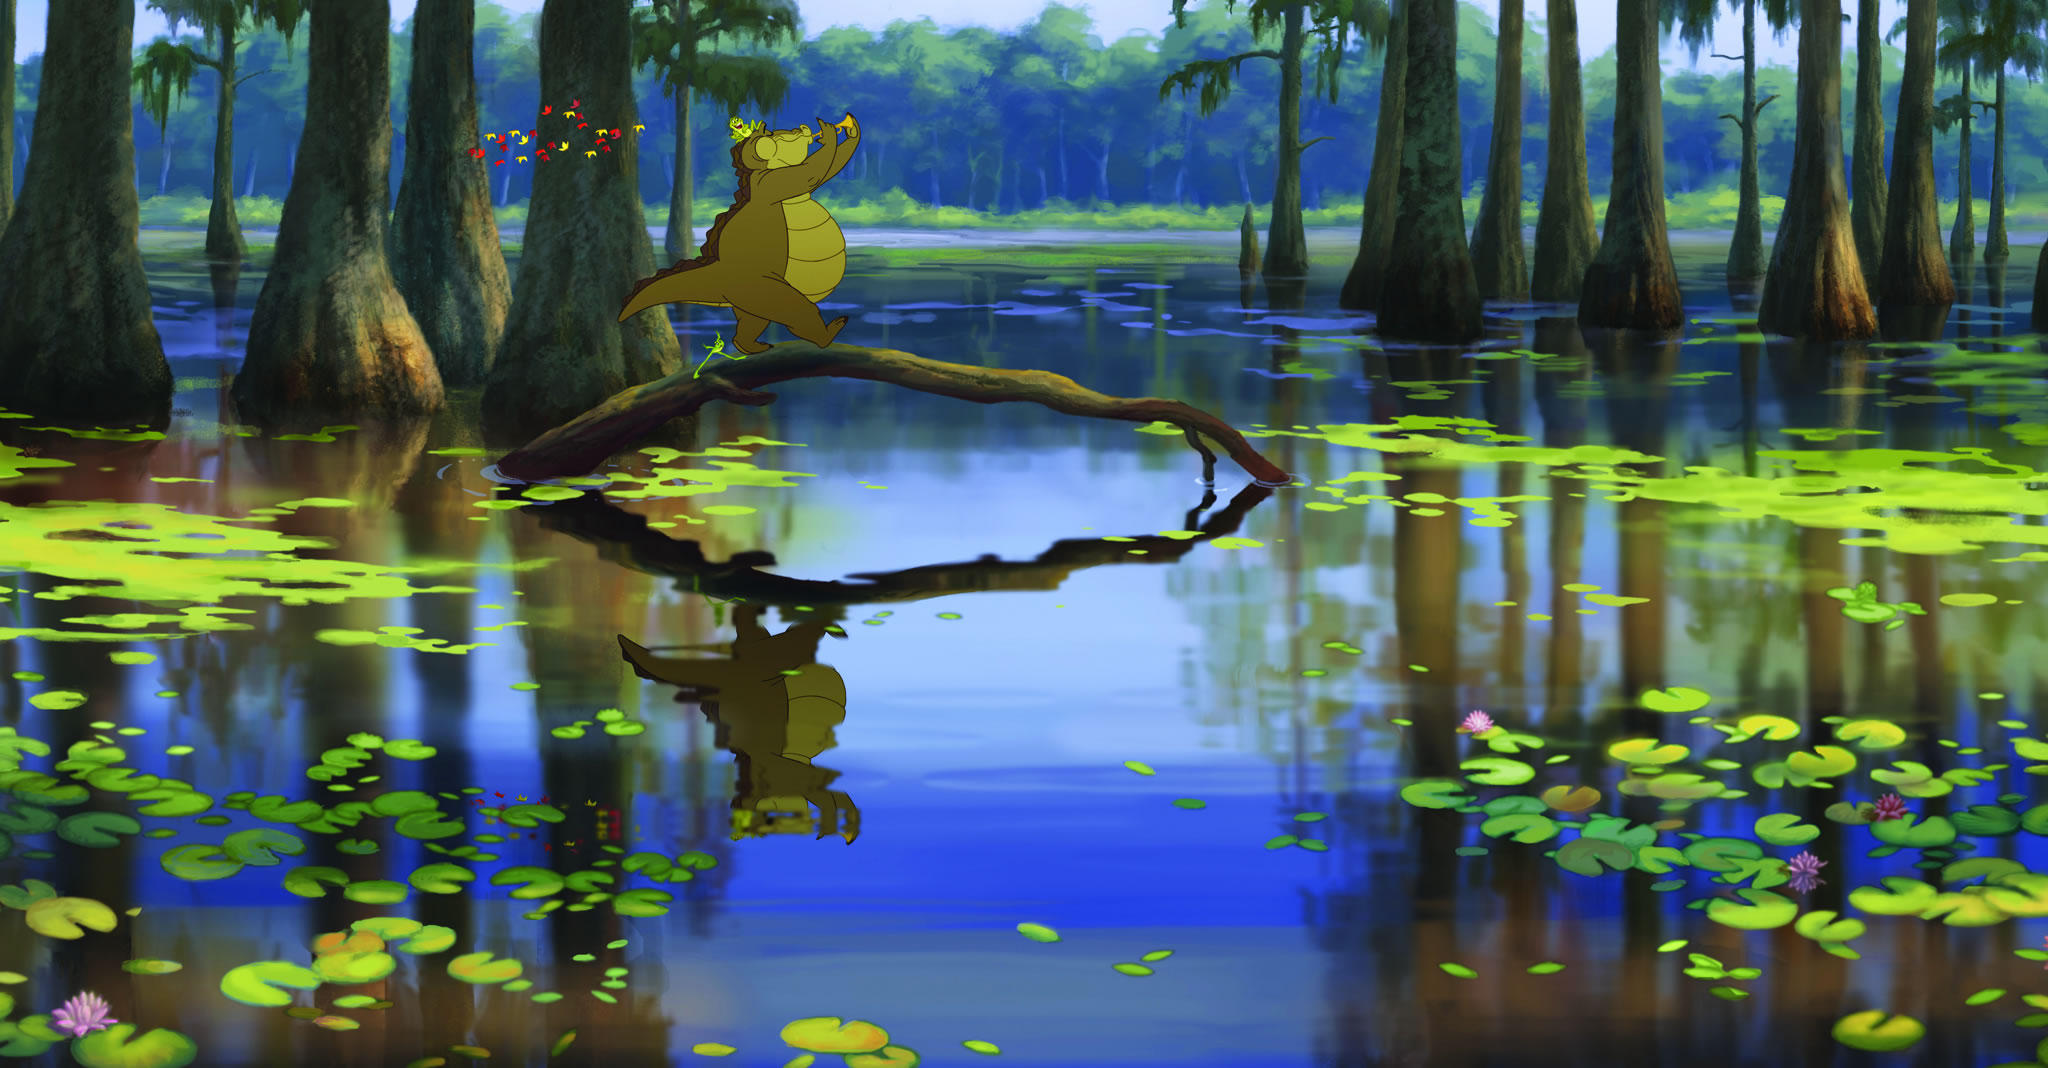 The Gator In Bayou From Disney S Princess And Frog Wallpaper